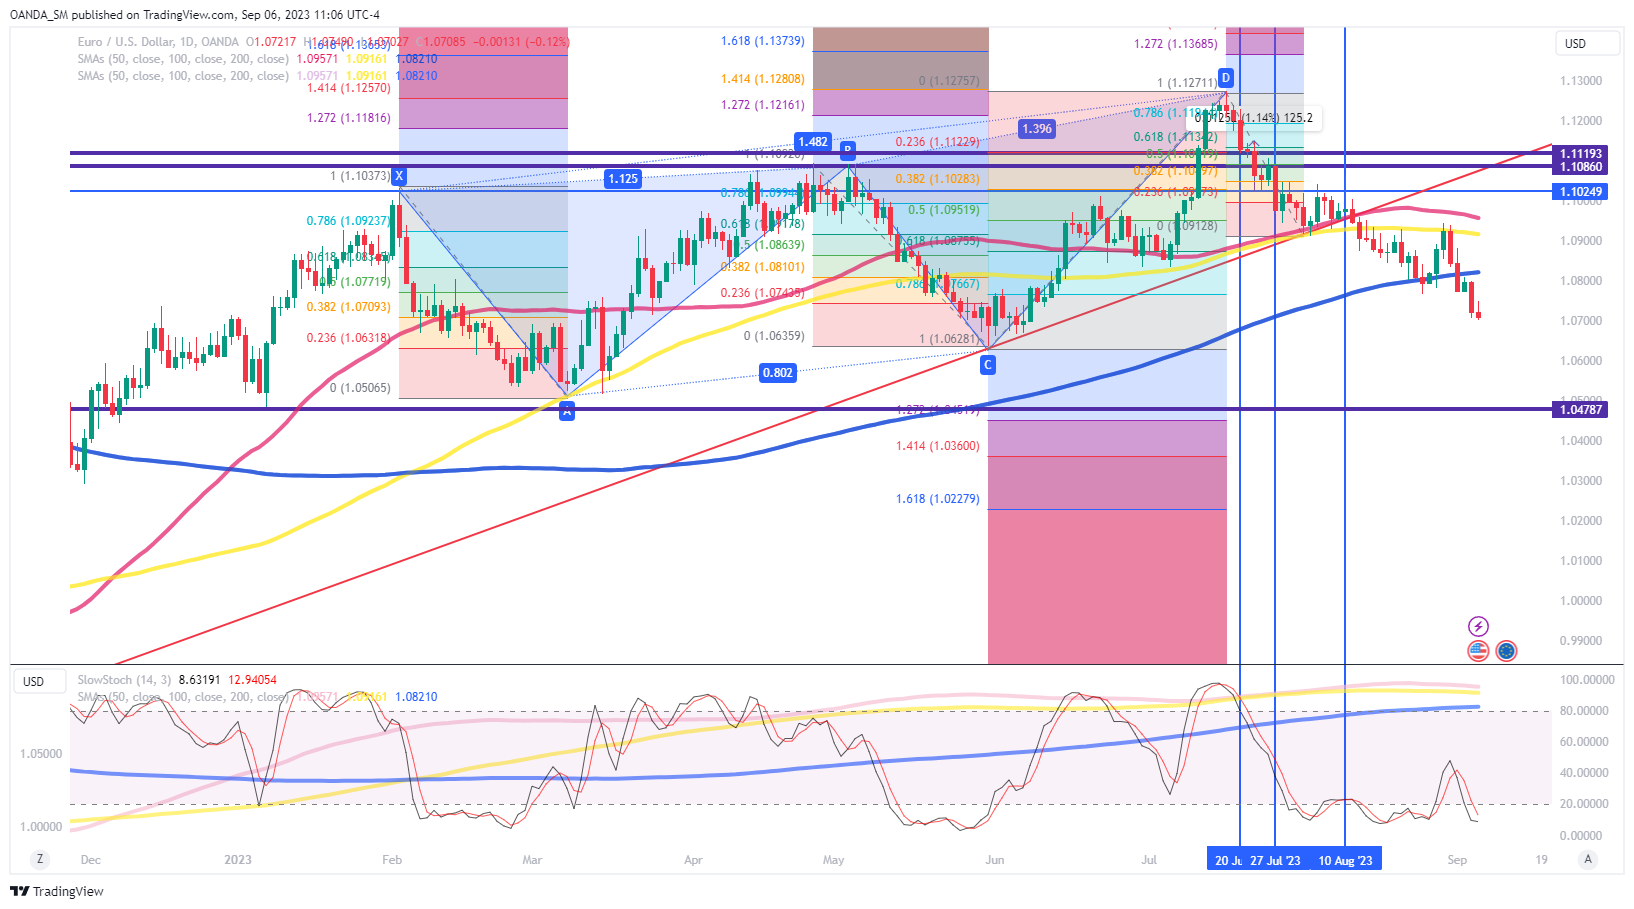 EUR/USD Forex Technical Analysis – ECB Rate Decision, Pipeline Reopening  Mean Heightened Volatility